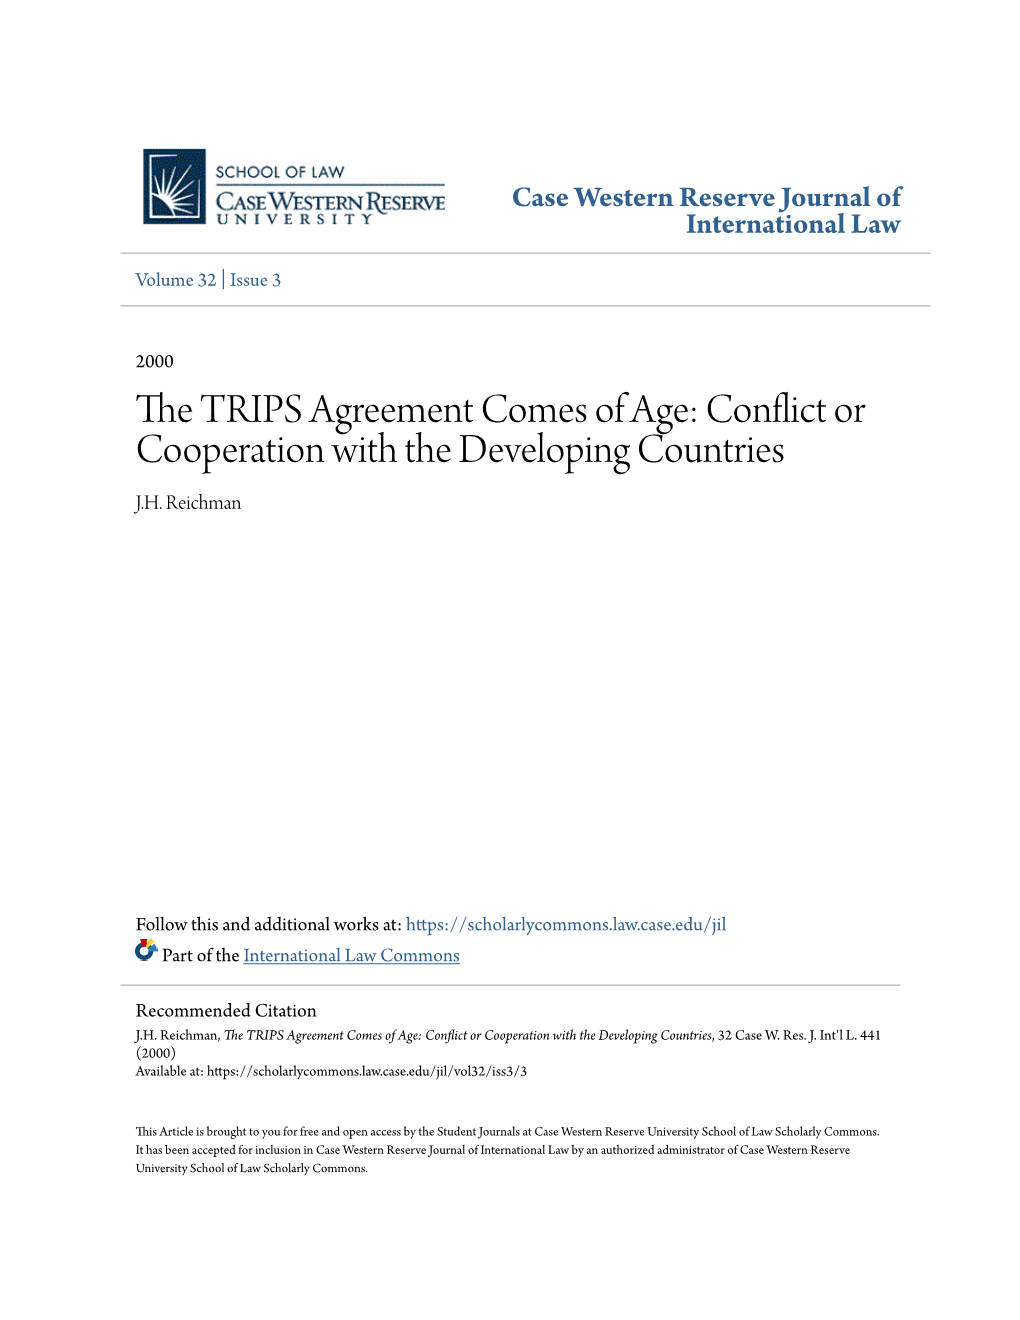 The TRIPS Agreement Comes of Age: Conflict Or Cooperation with the Developing Countries J.H